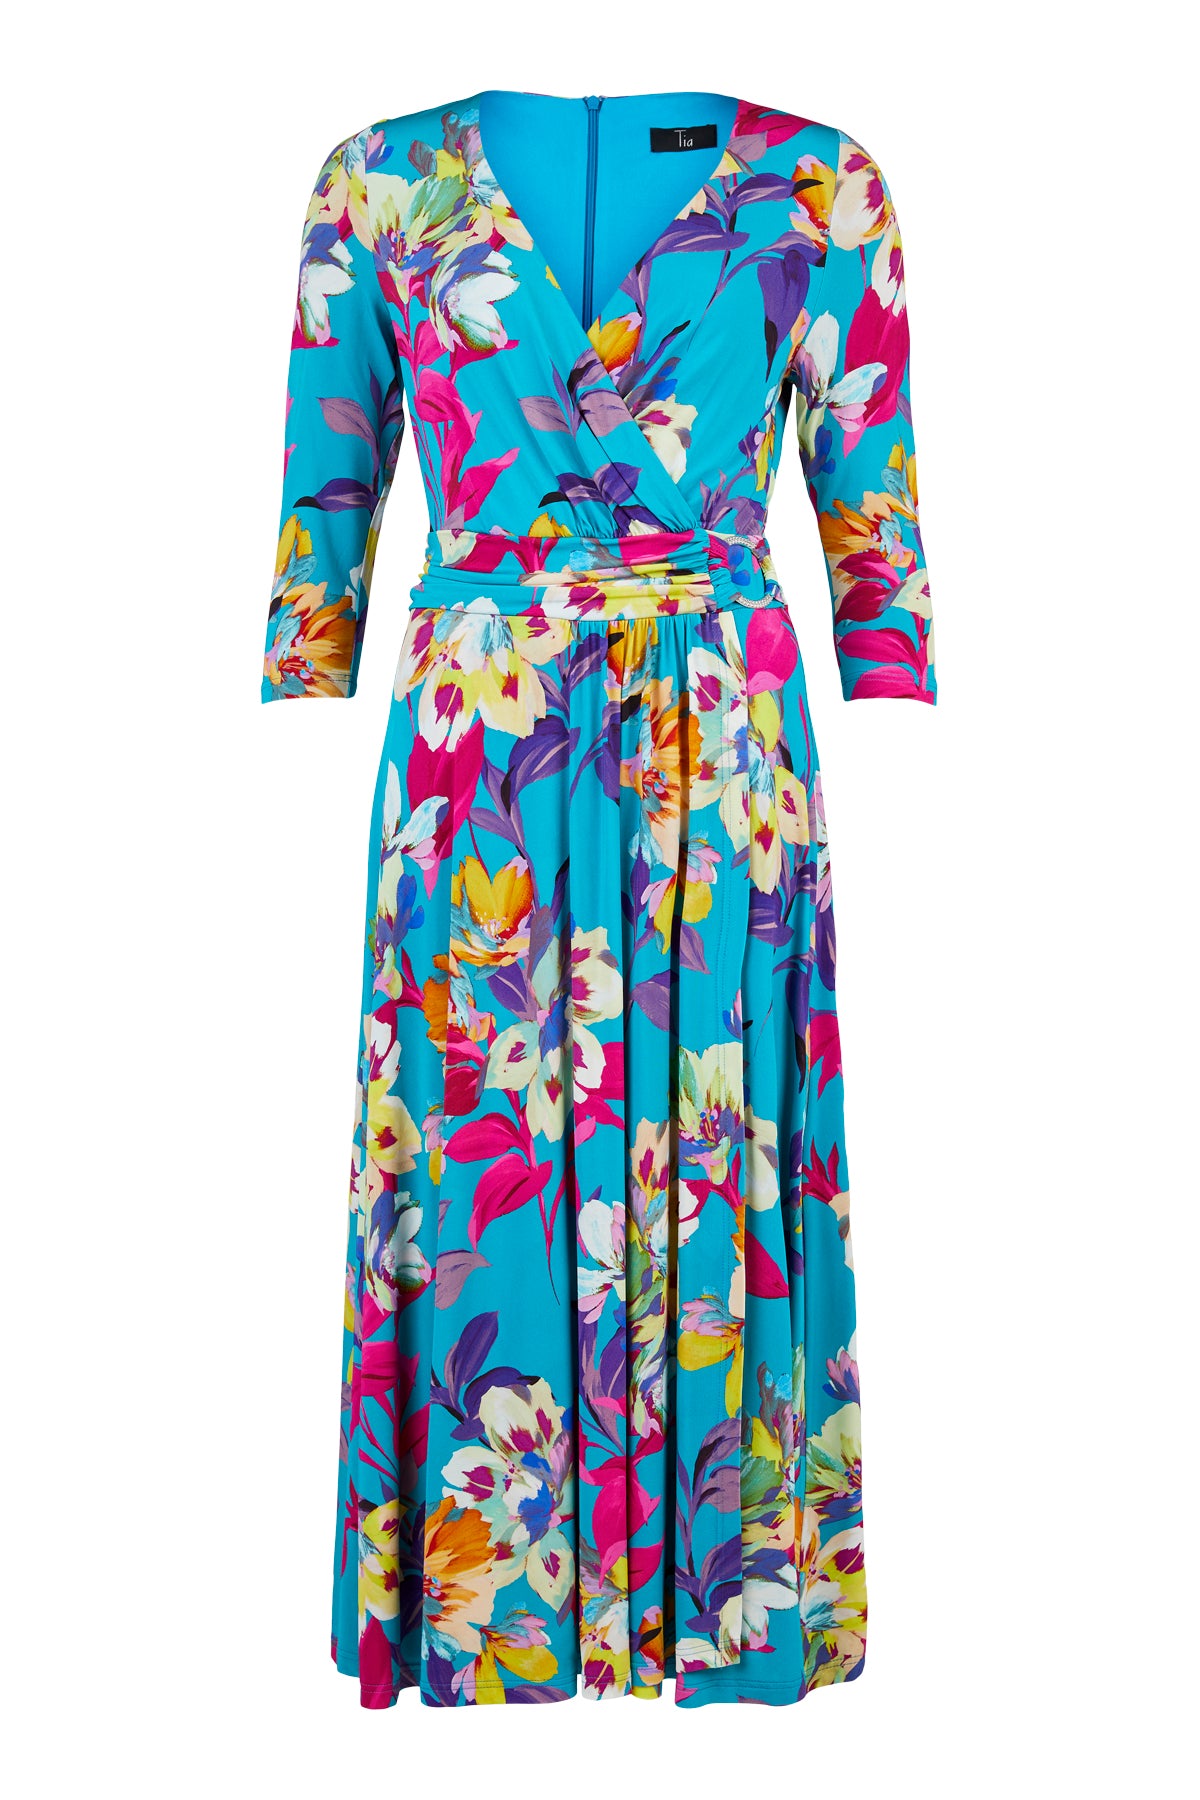 Tia 78699 Blue Floral Print Dress with Sleeves